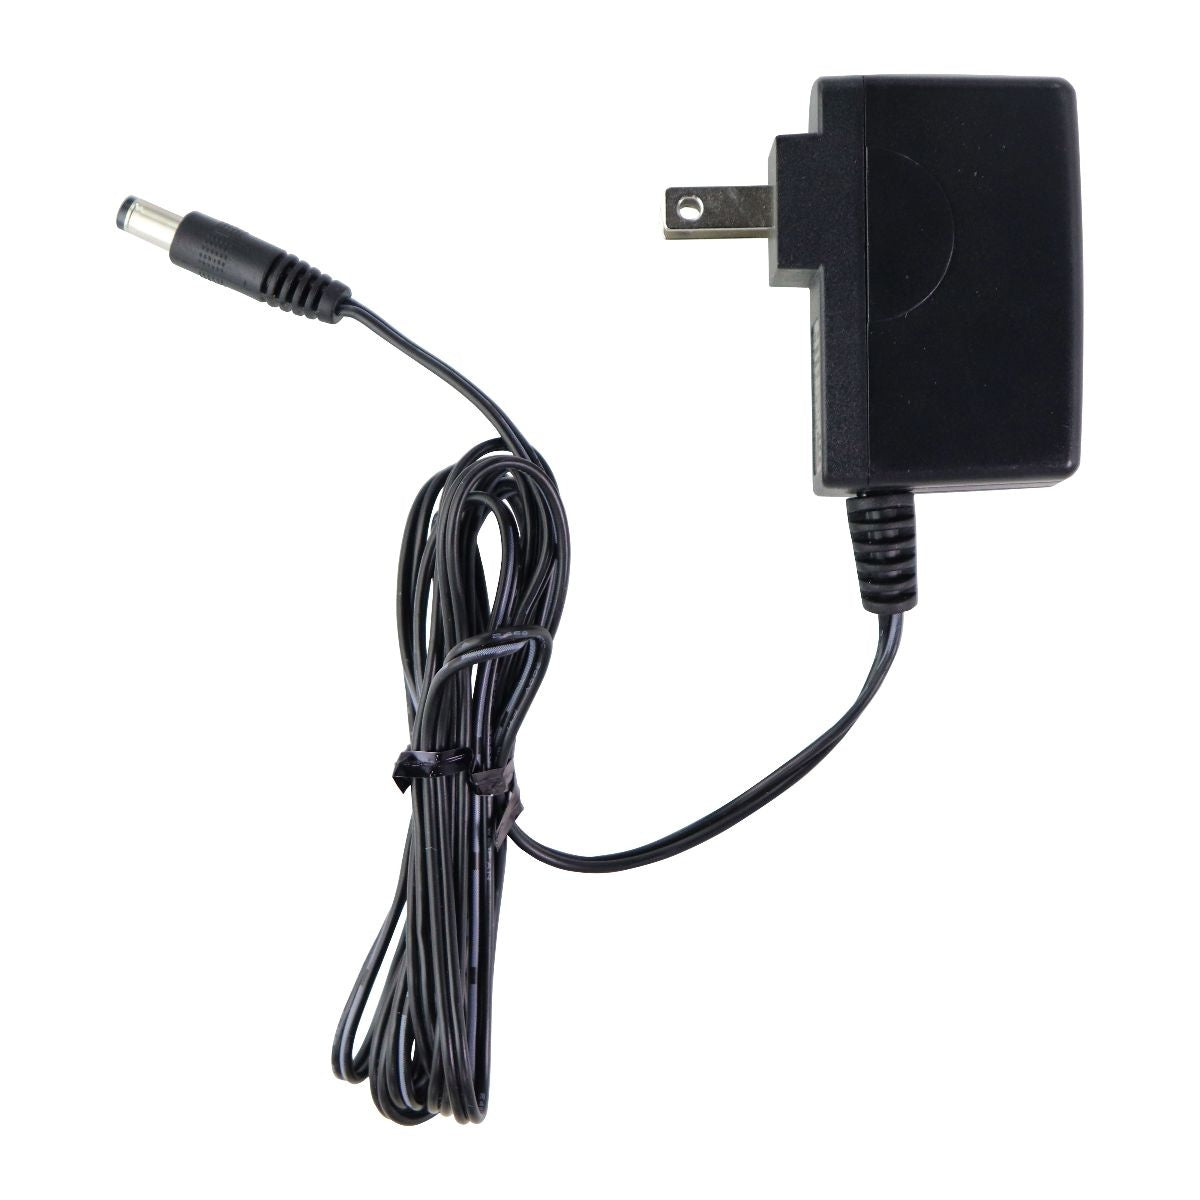 Yealink (5V/1.2A) AC Adapter Power Supply Wall Charger - Black (YLPS051200C-US)